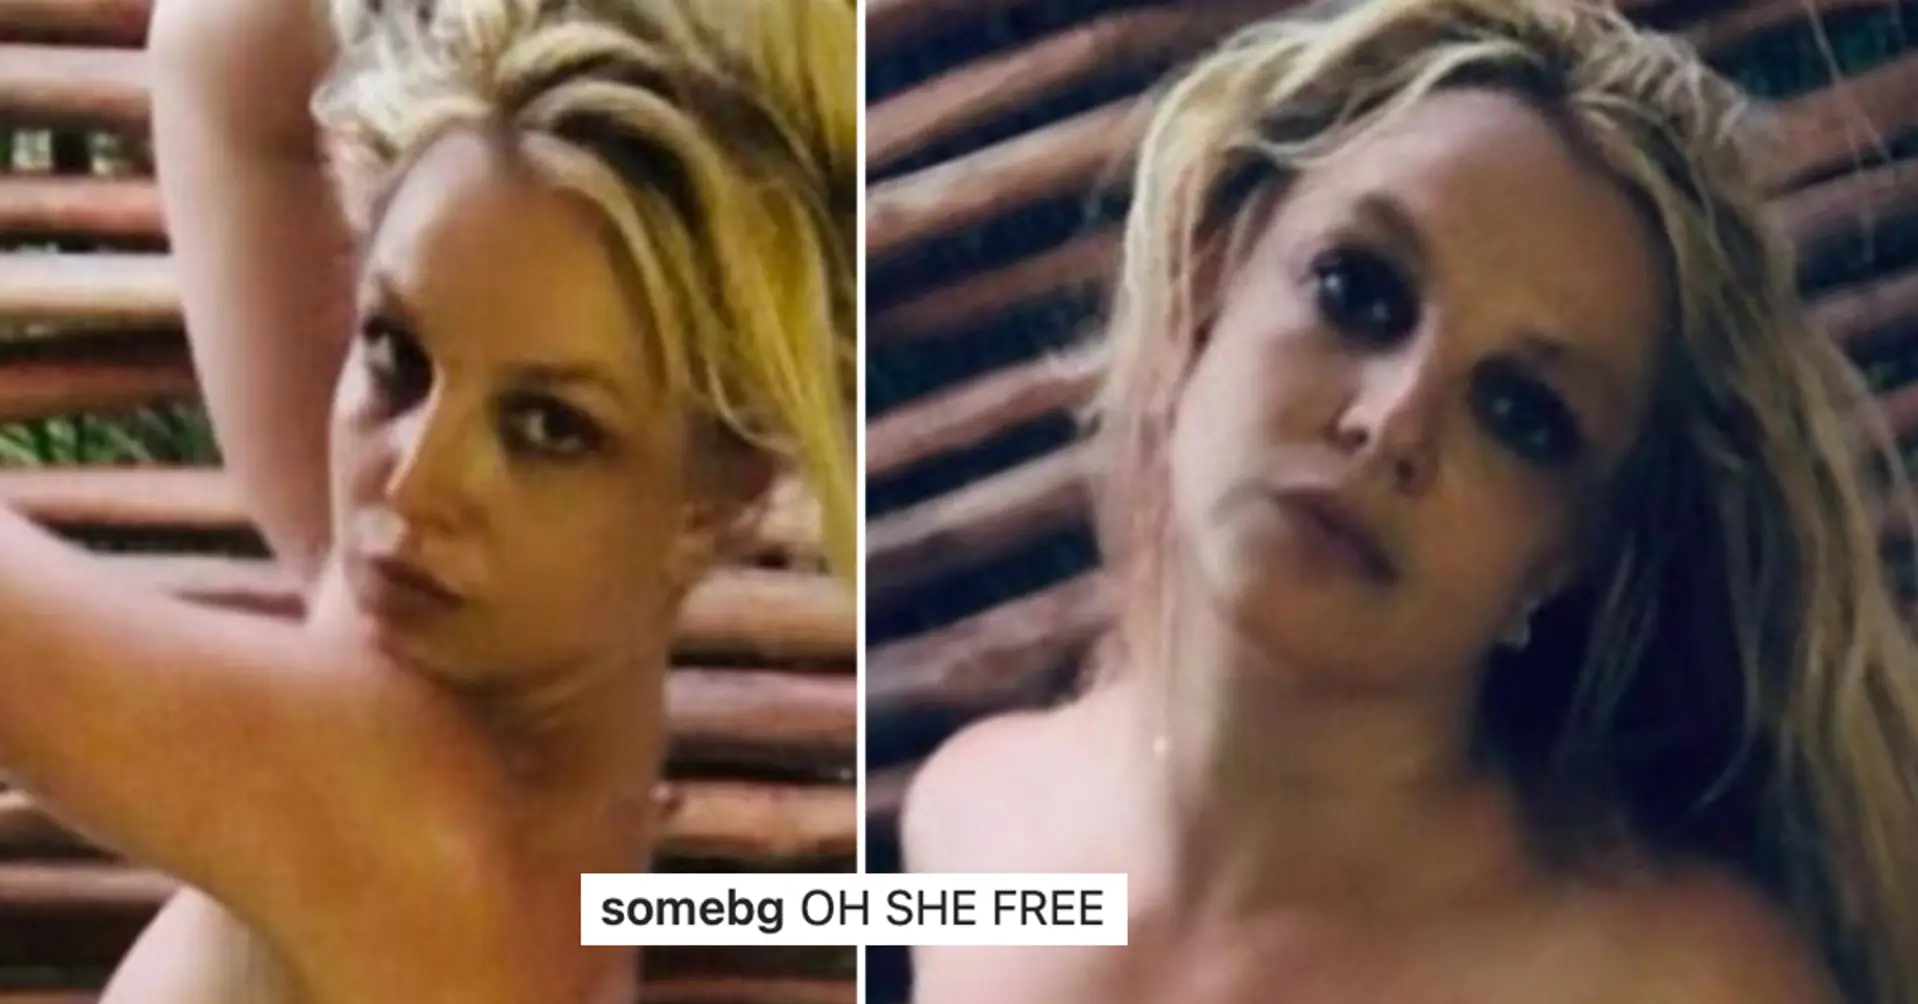 Britney Spears shocks fans with 100% nude photos on Instagram after conservatorship victory